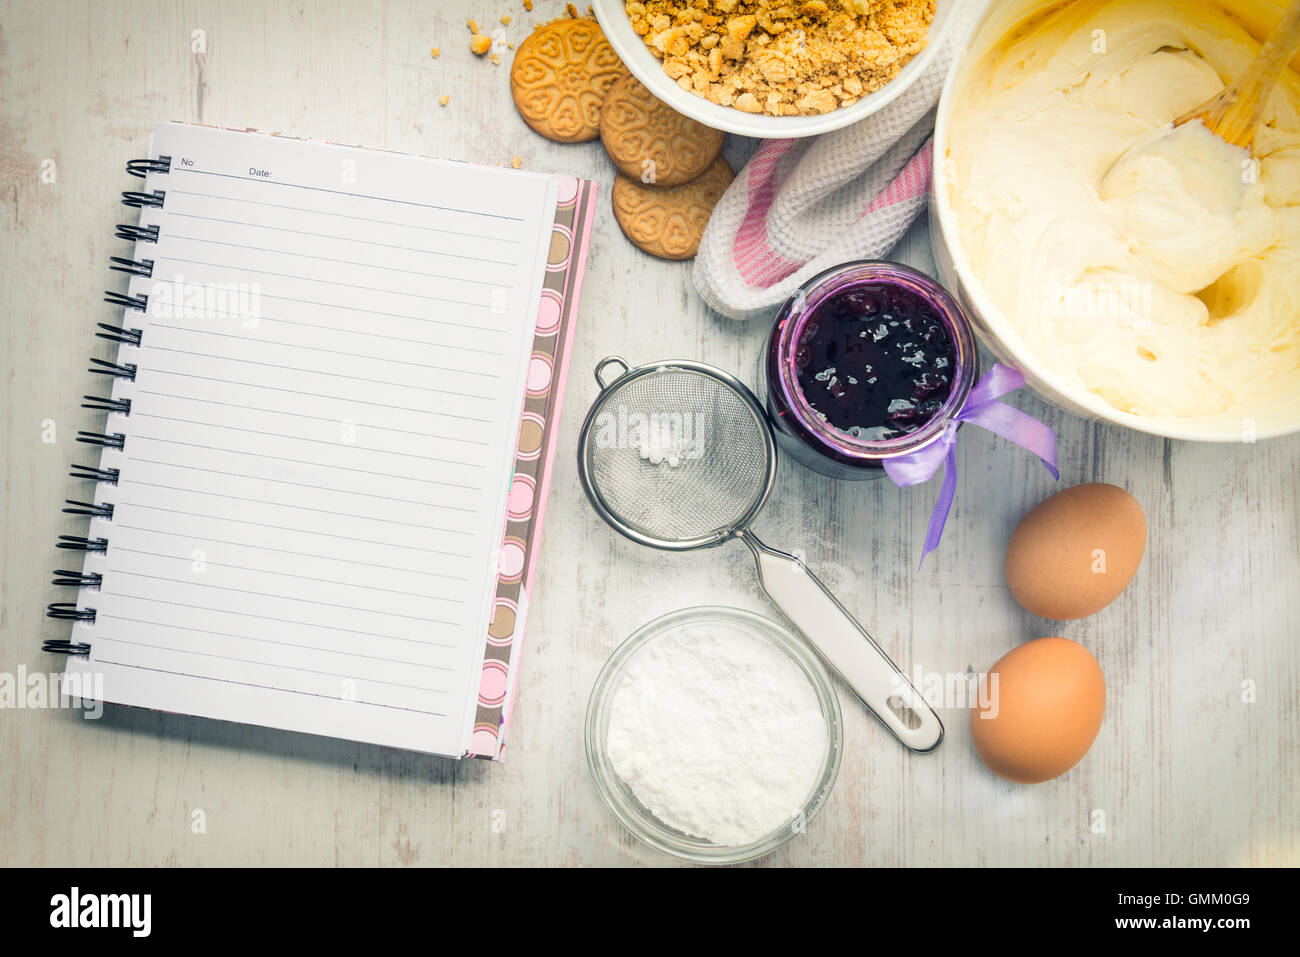 Empty recipe notebook with cheese cake ingredients prepared over a white wood background. Stock Photo